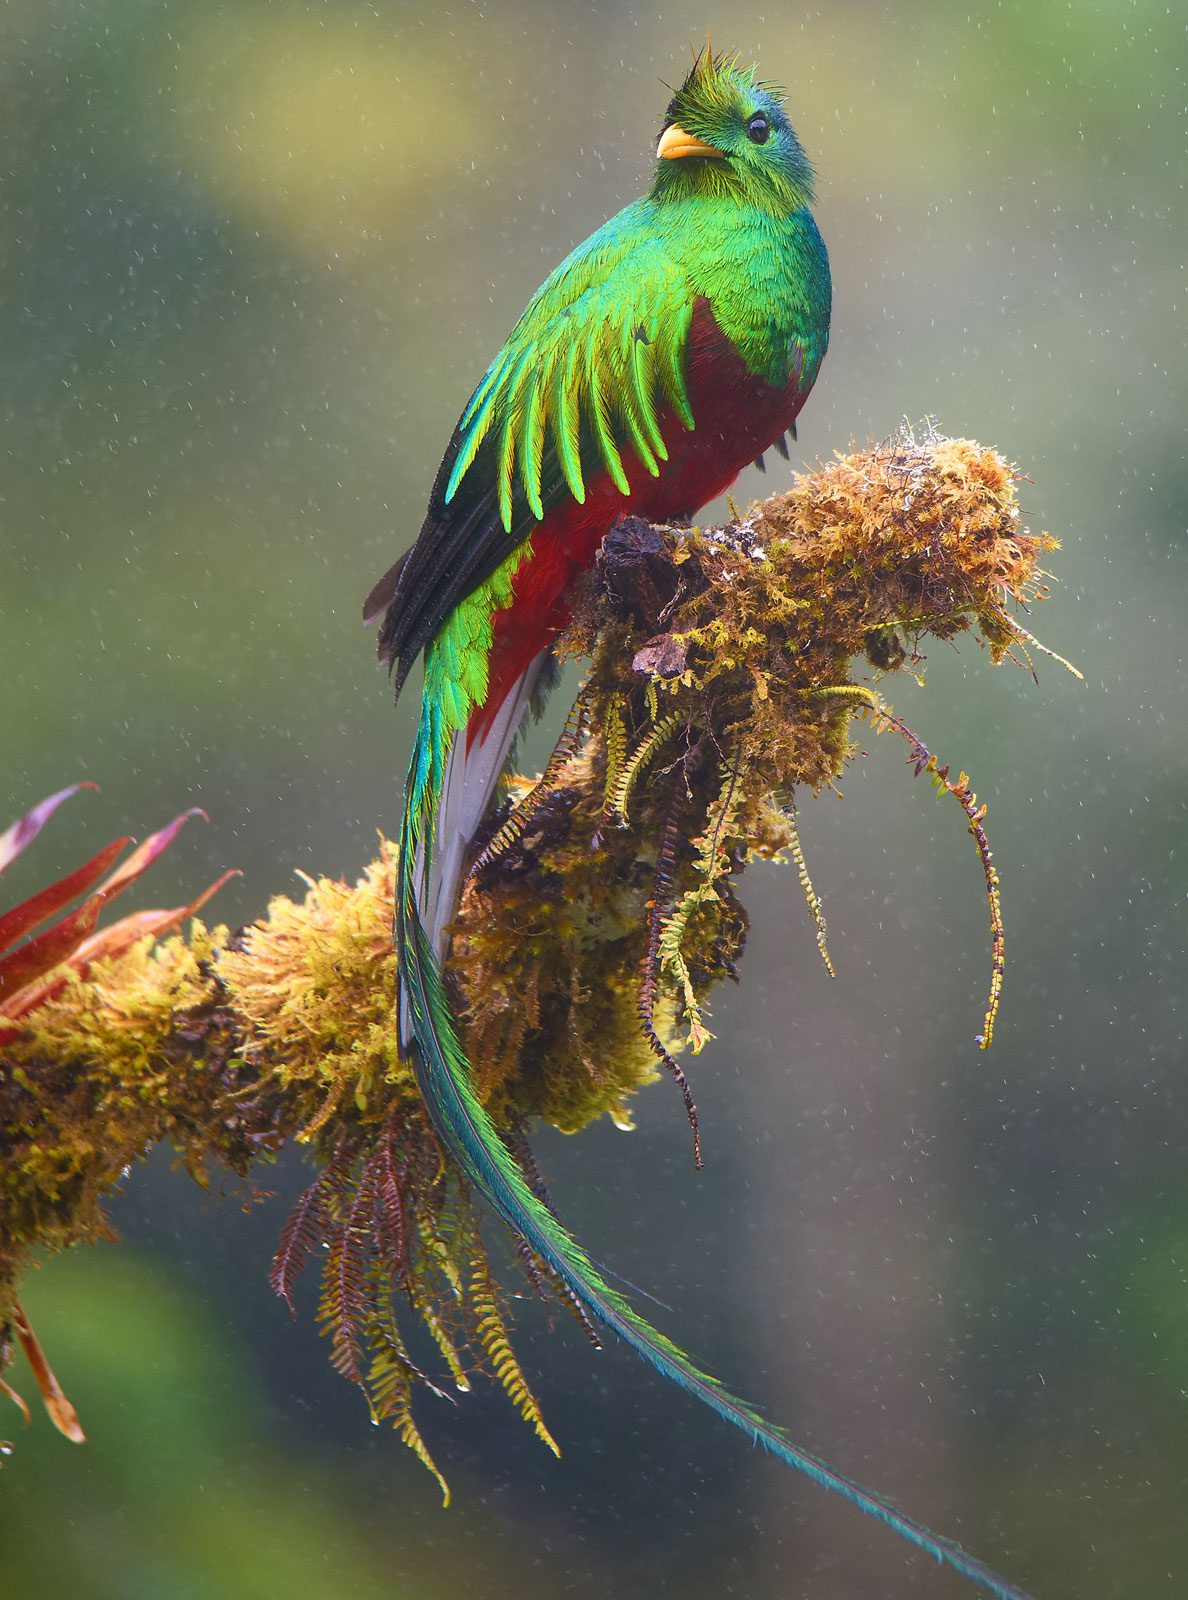 iridescent green bird with a long tail, perches on a mossy branch in the rain.